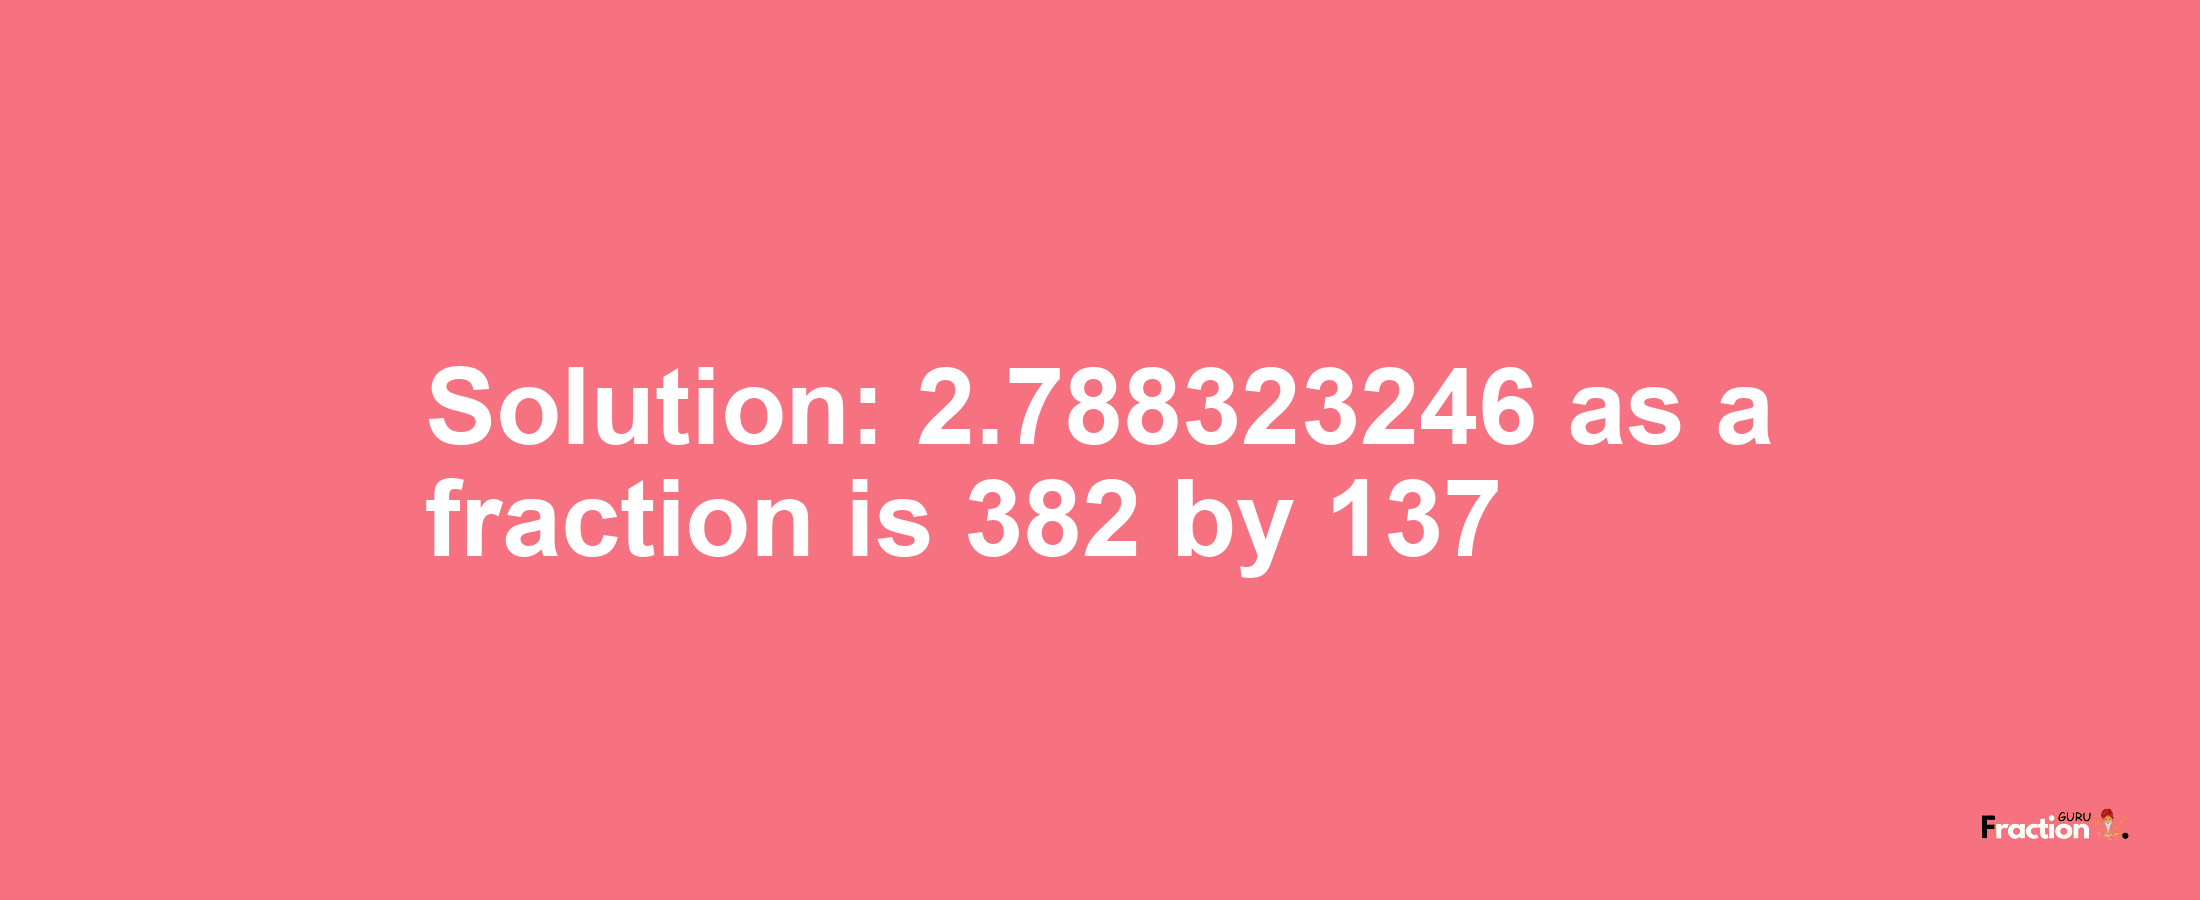 Solution:2.788323246 as a fraction is 382/137